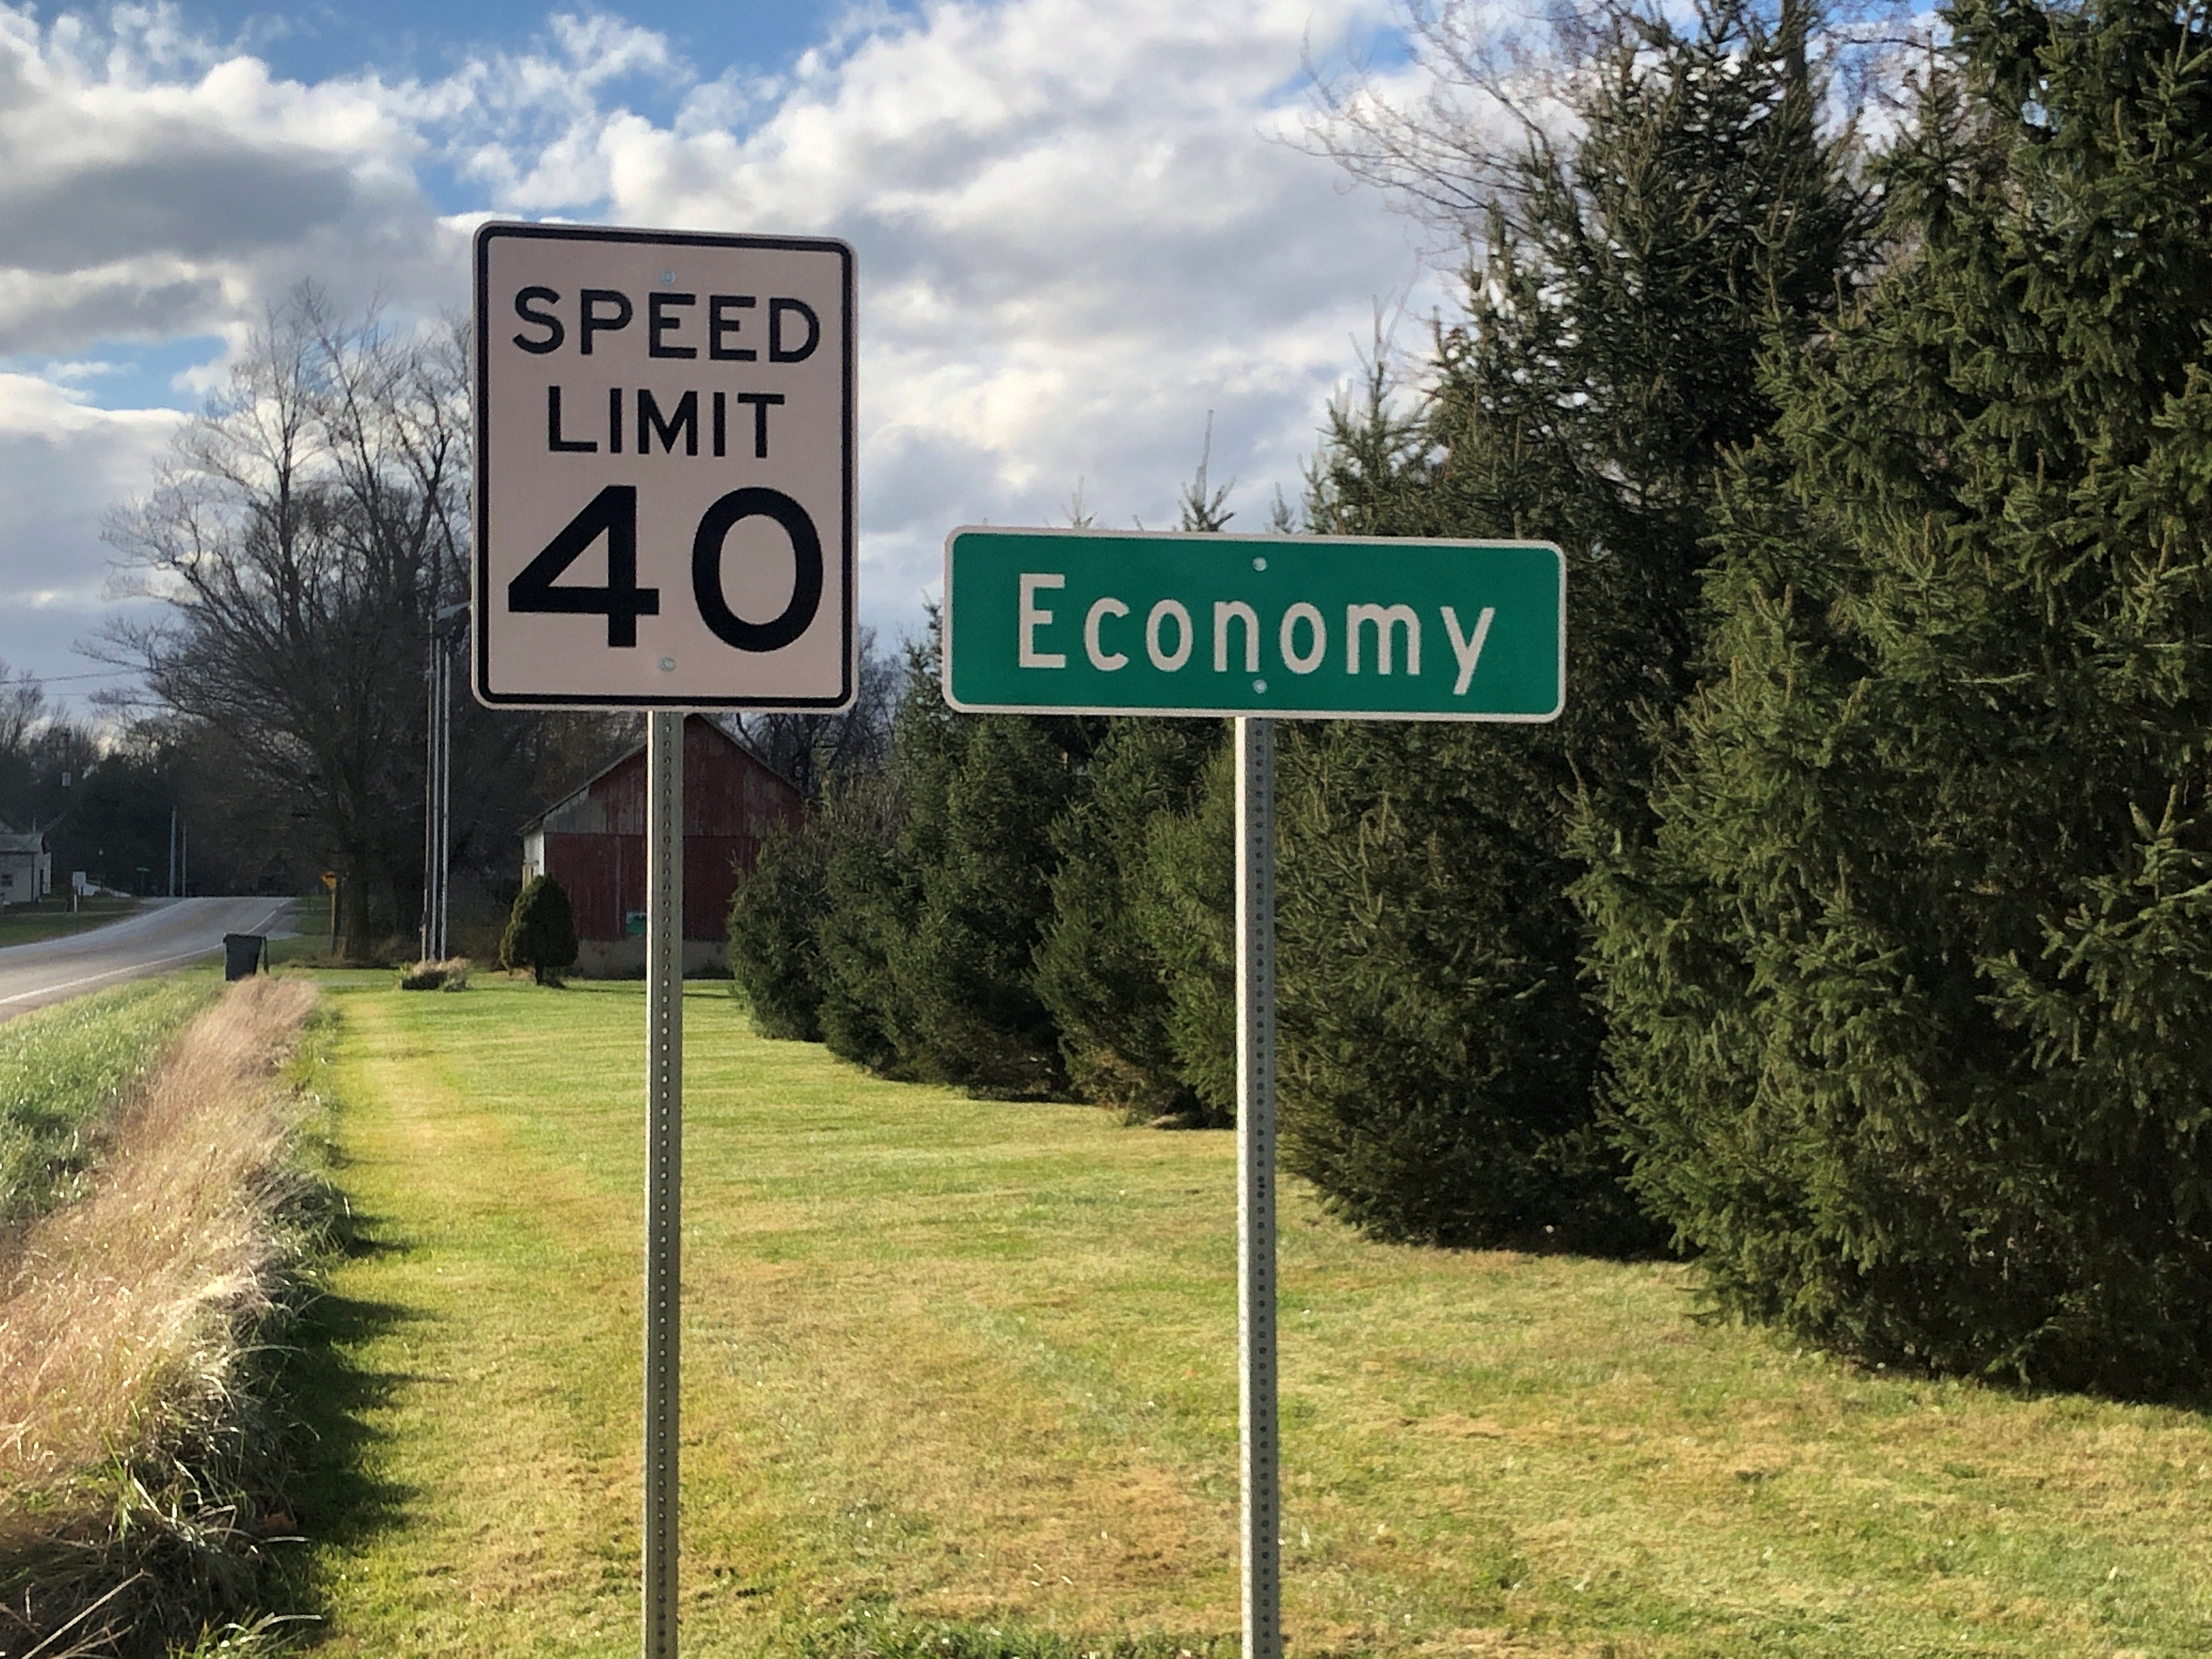 A speed limit sign is seen beside a city sign for Economy, Indiana